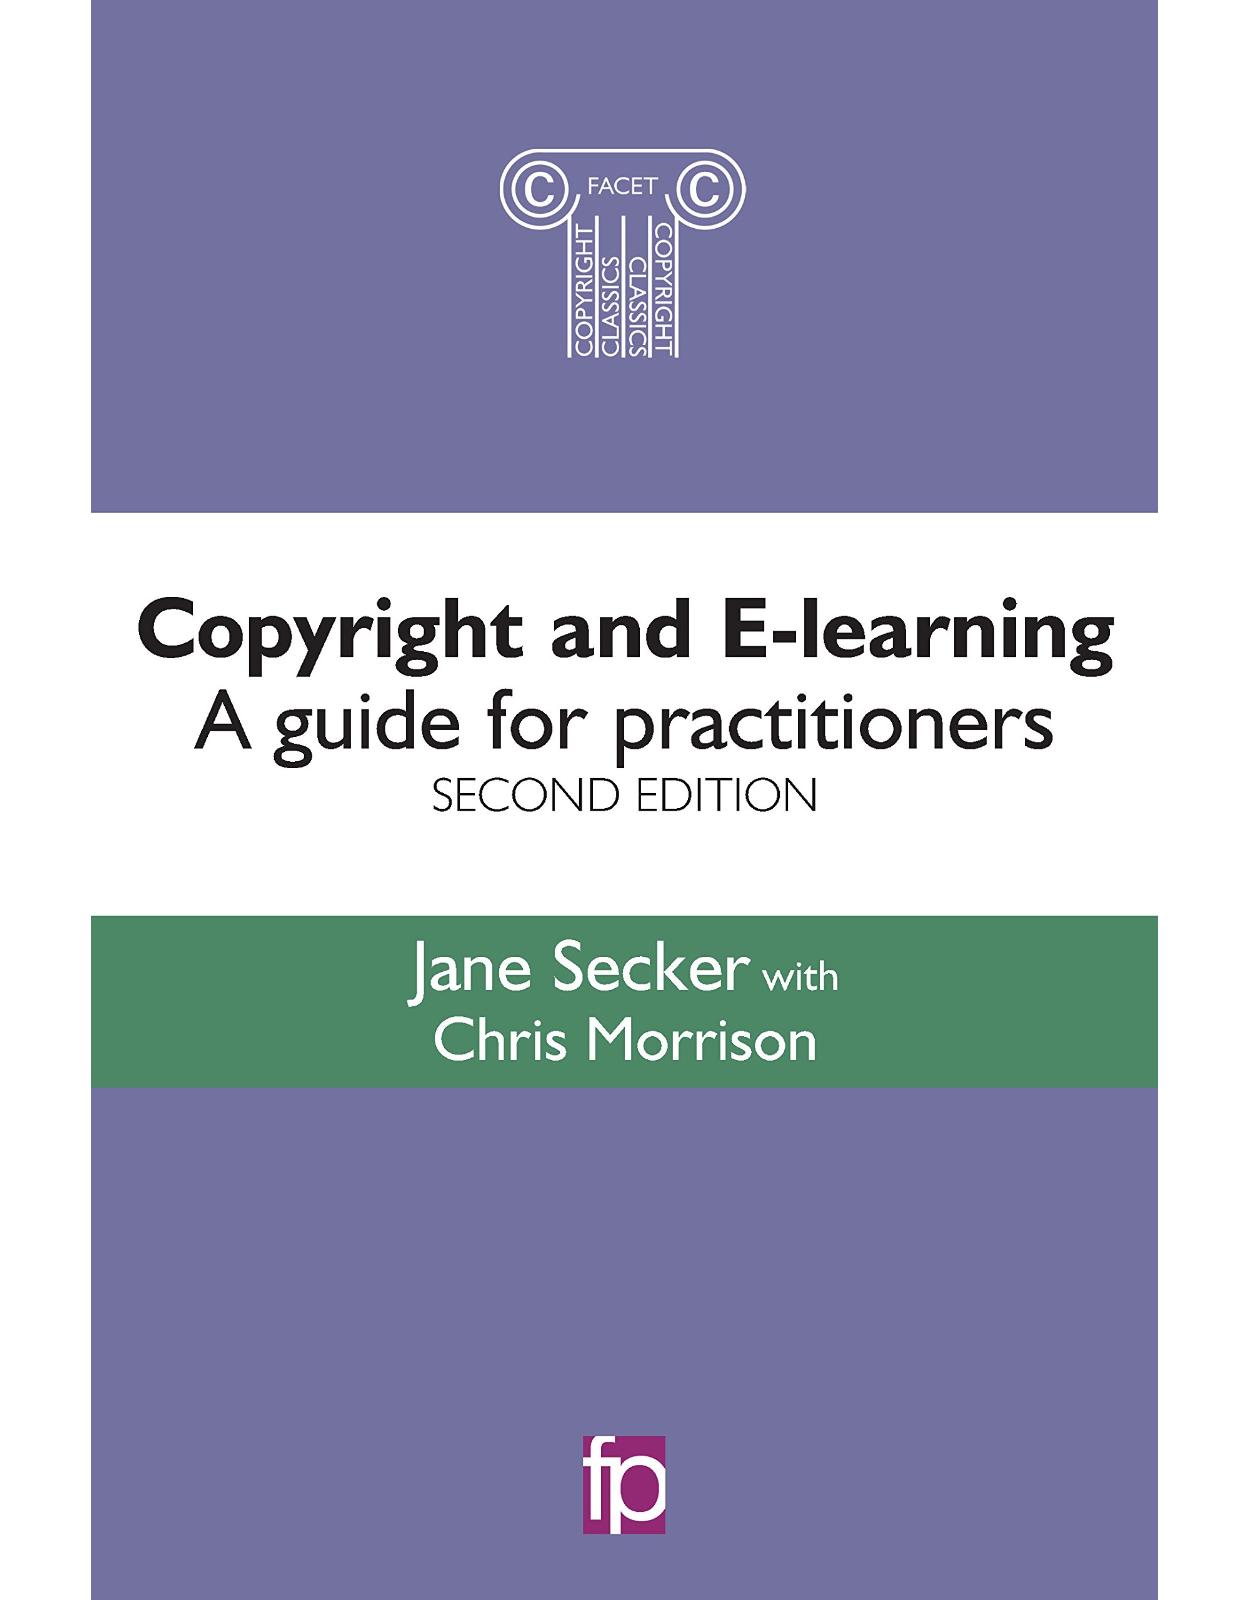 Copyright and e-learning: A guide for practitioners 